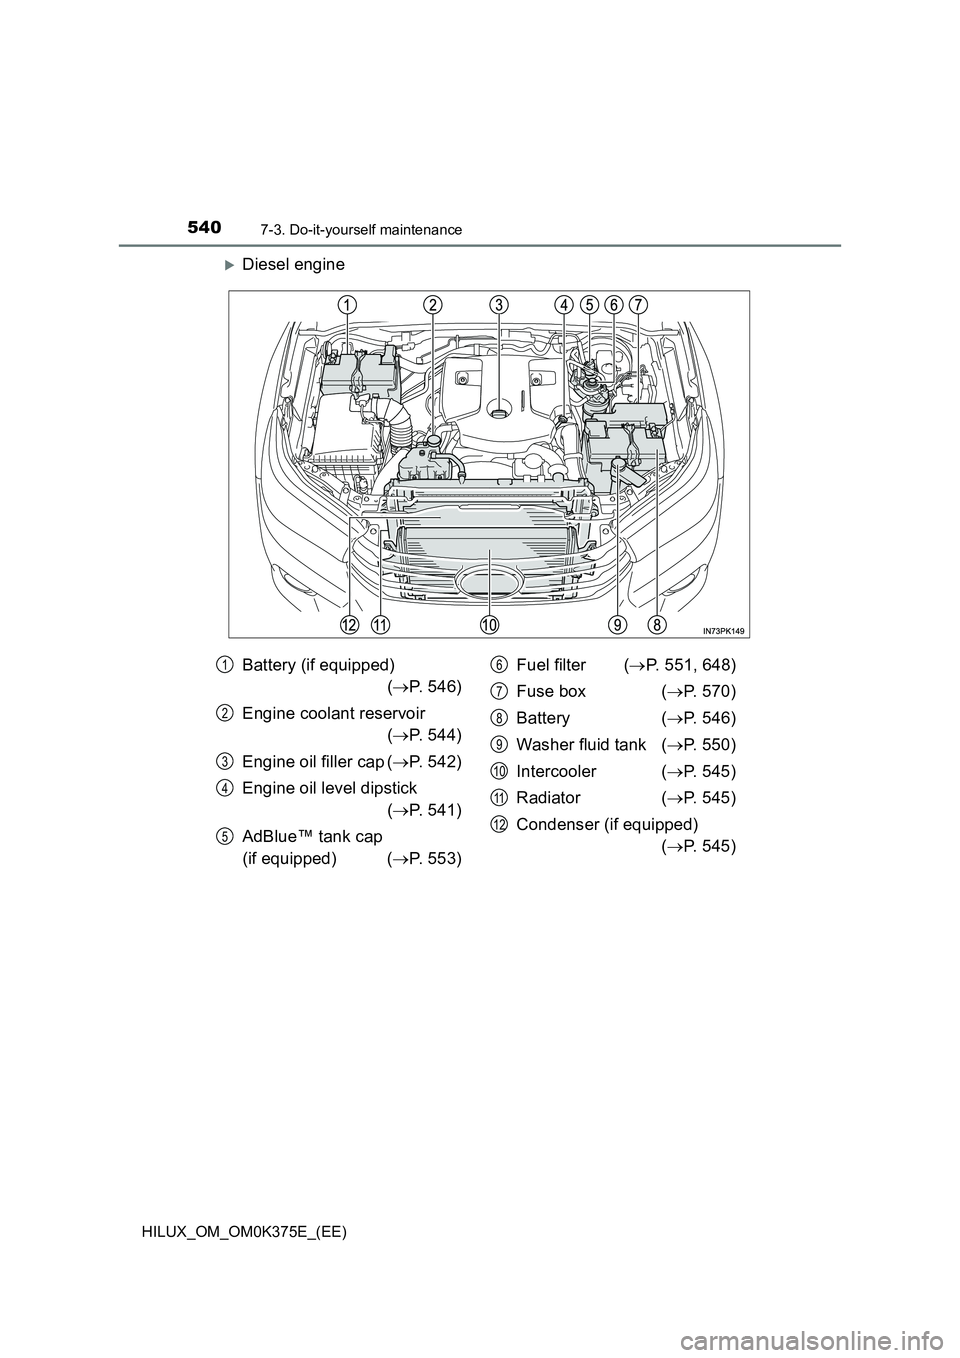 TOYOTA HILUX 2018  Owners Manual 5407-3. Do-it-yourself maintenance
HILUX_OM_OM0K375E_(EE)
Diesel engine
Battery (if equipped) 
 ( P. 546) 
Engine coolant reservoir  
( P. 544) 
Engine oil filler cap ( P. 542) 
Engine oil